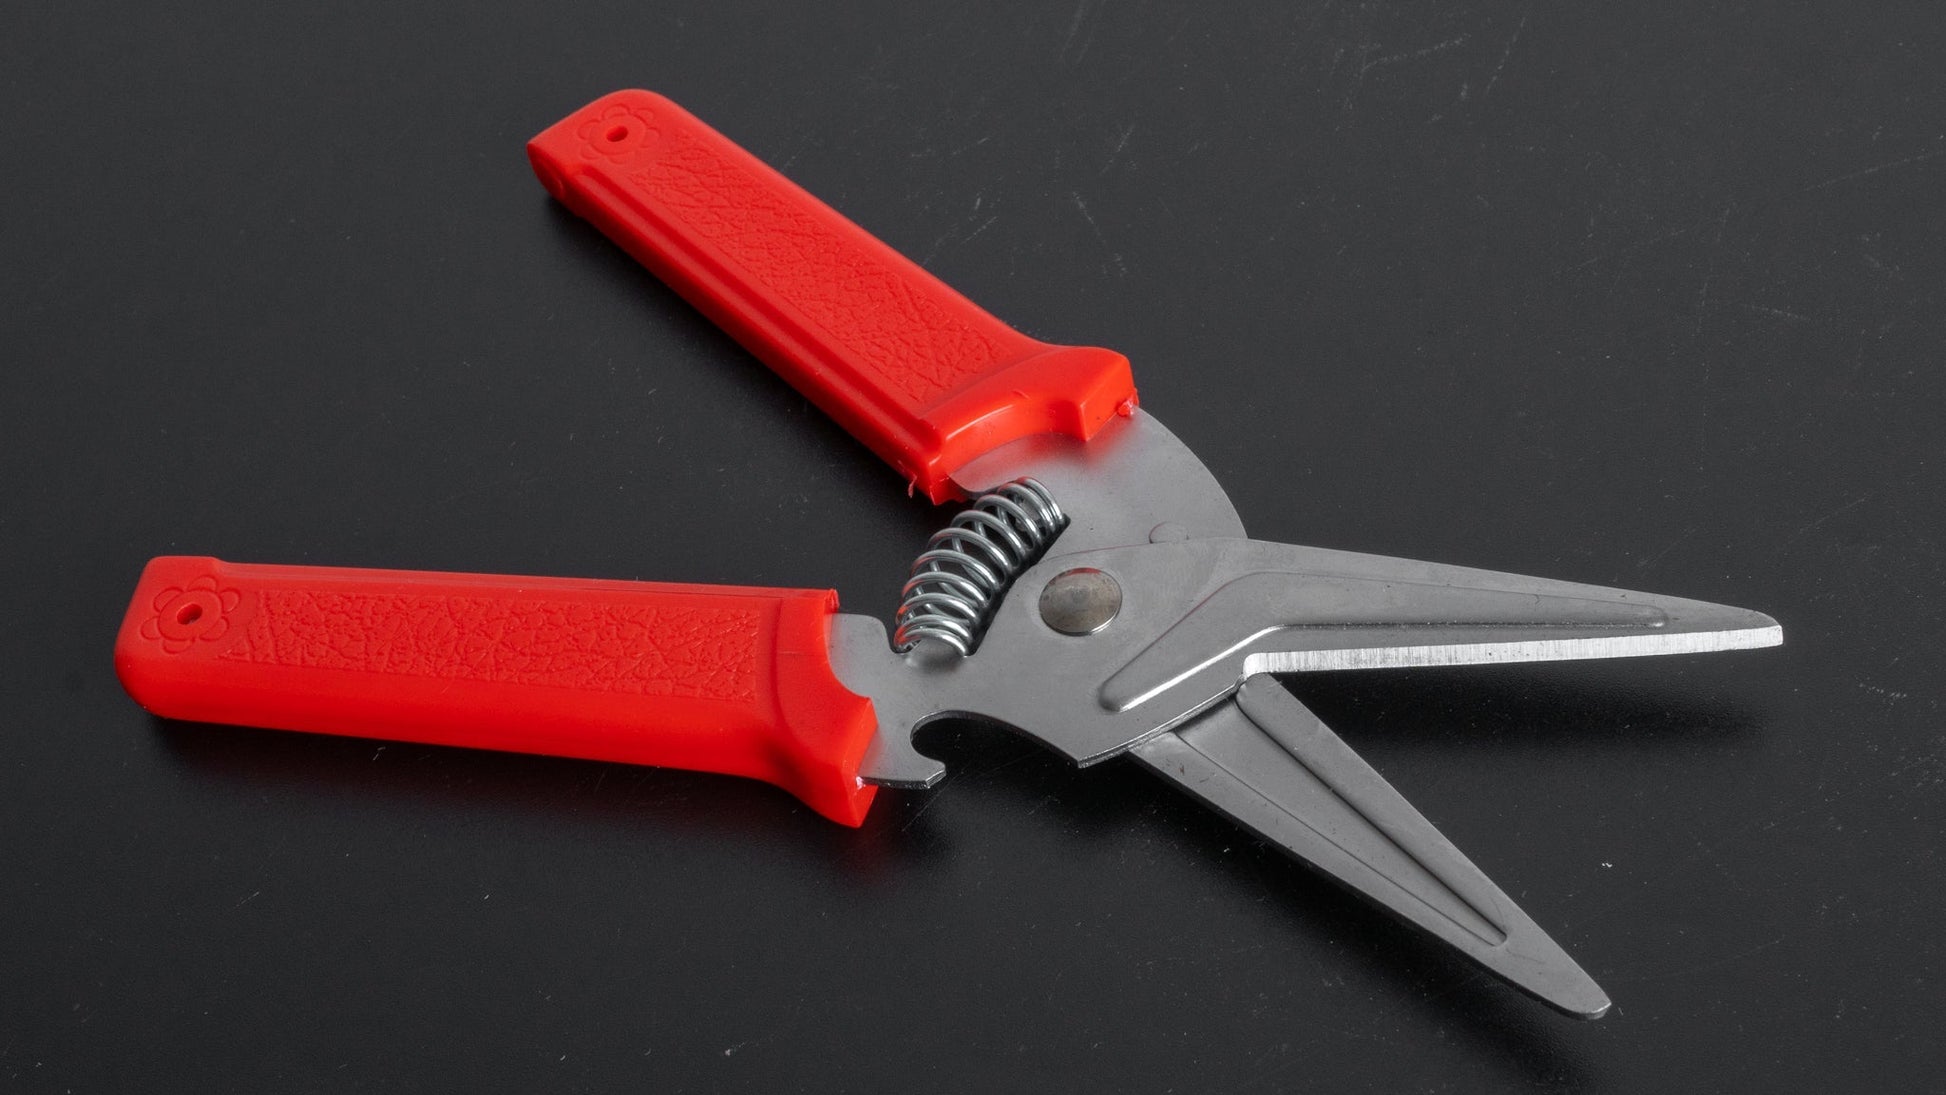 Mumei Utility Shears 55mm (Red/ Special Offer) - HITOHIRA